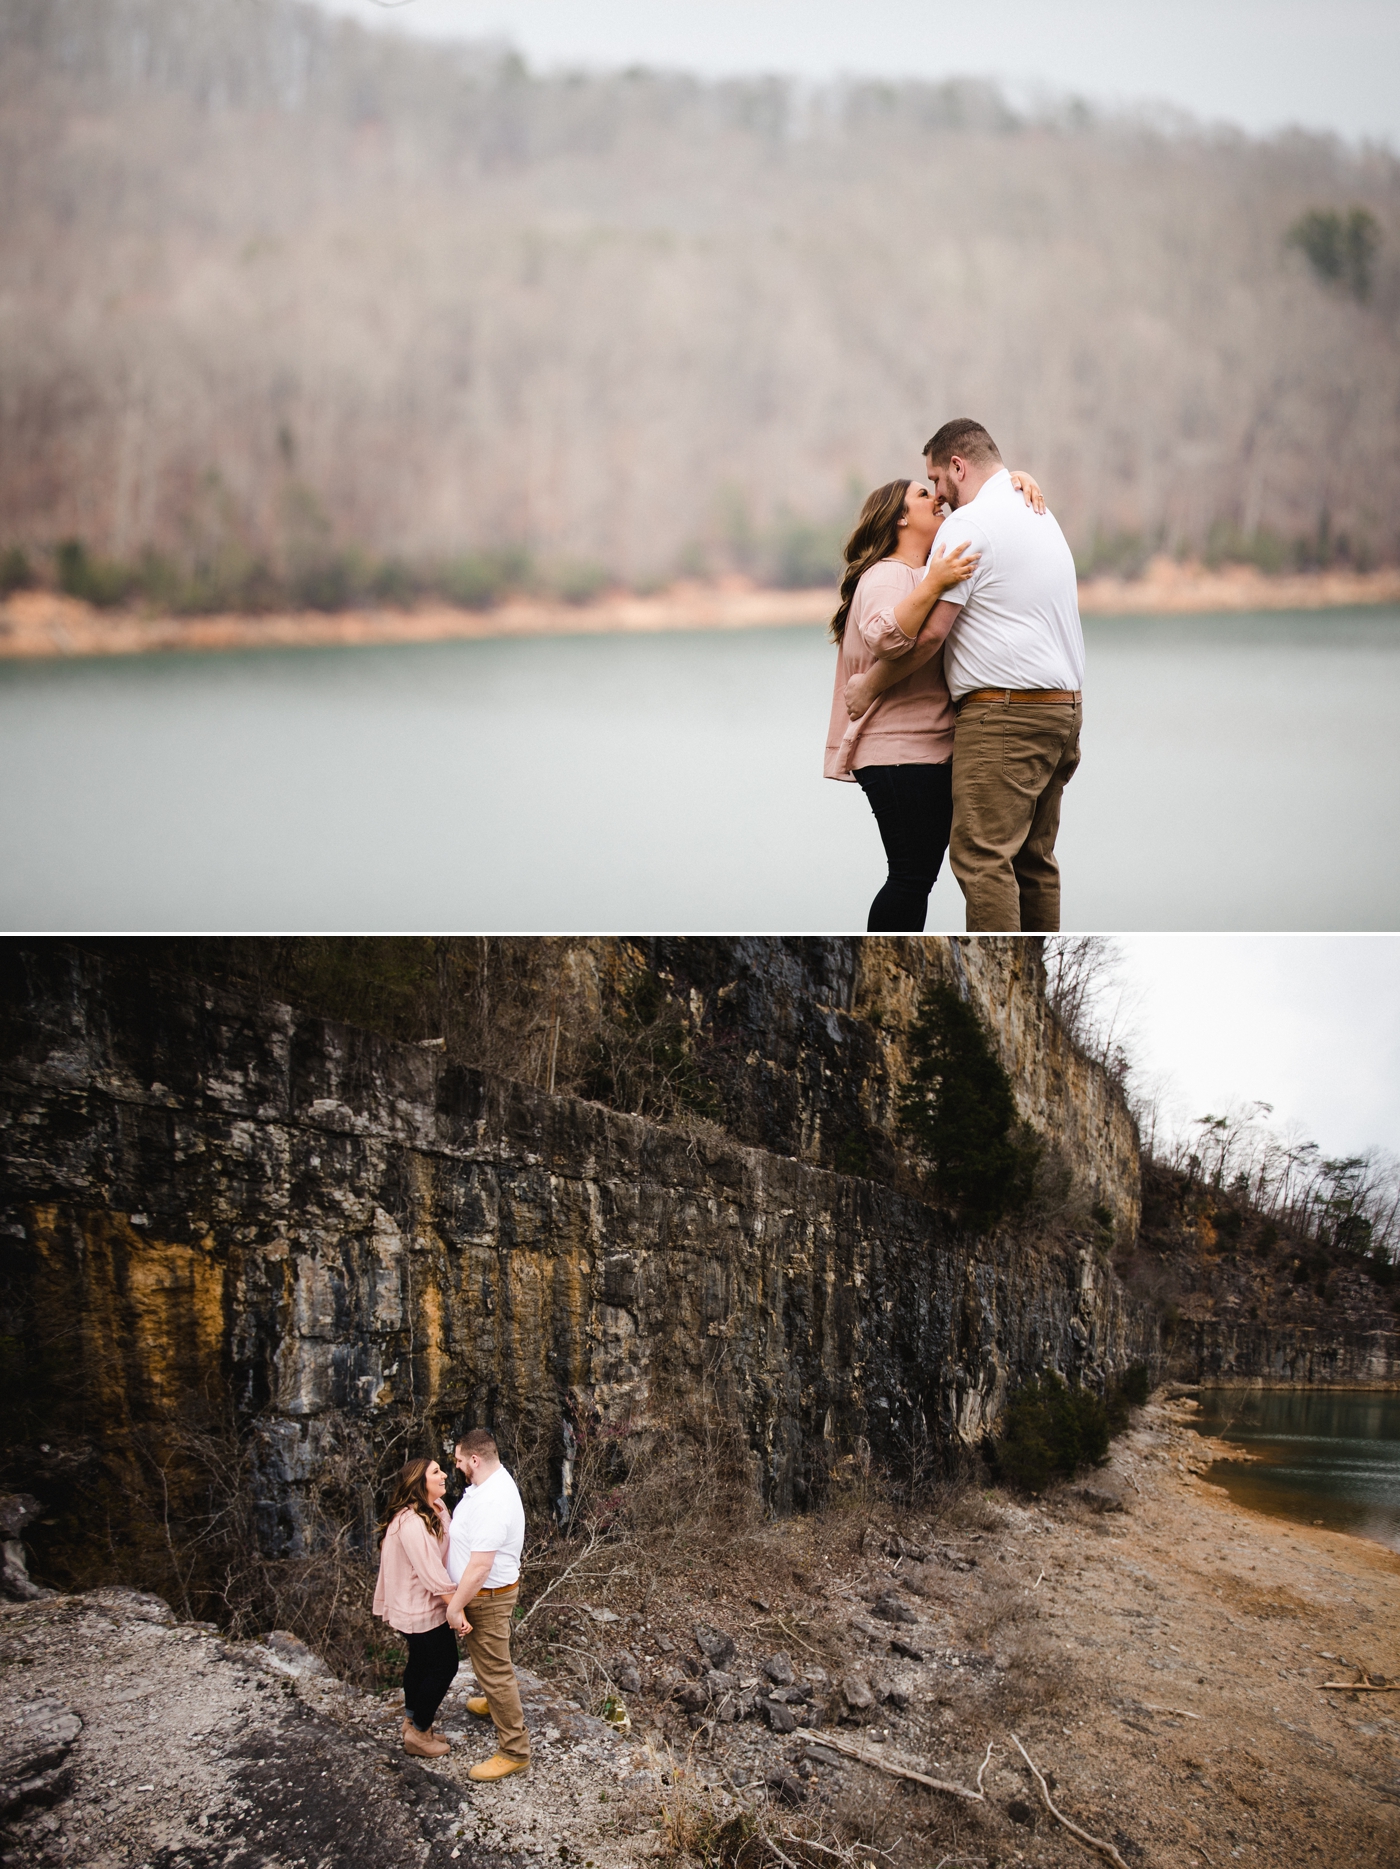 Tennessee Engagement Photos - Carly & CJ 1